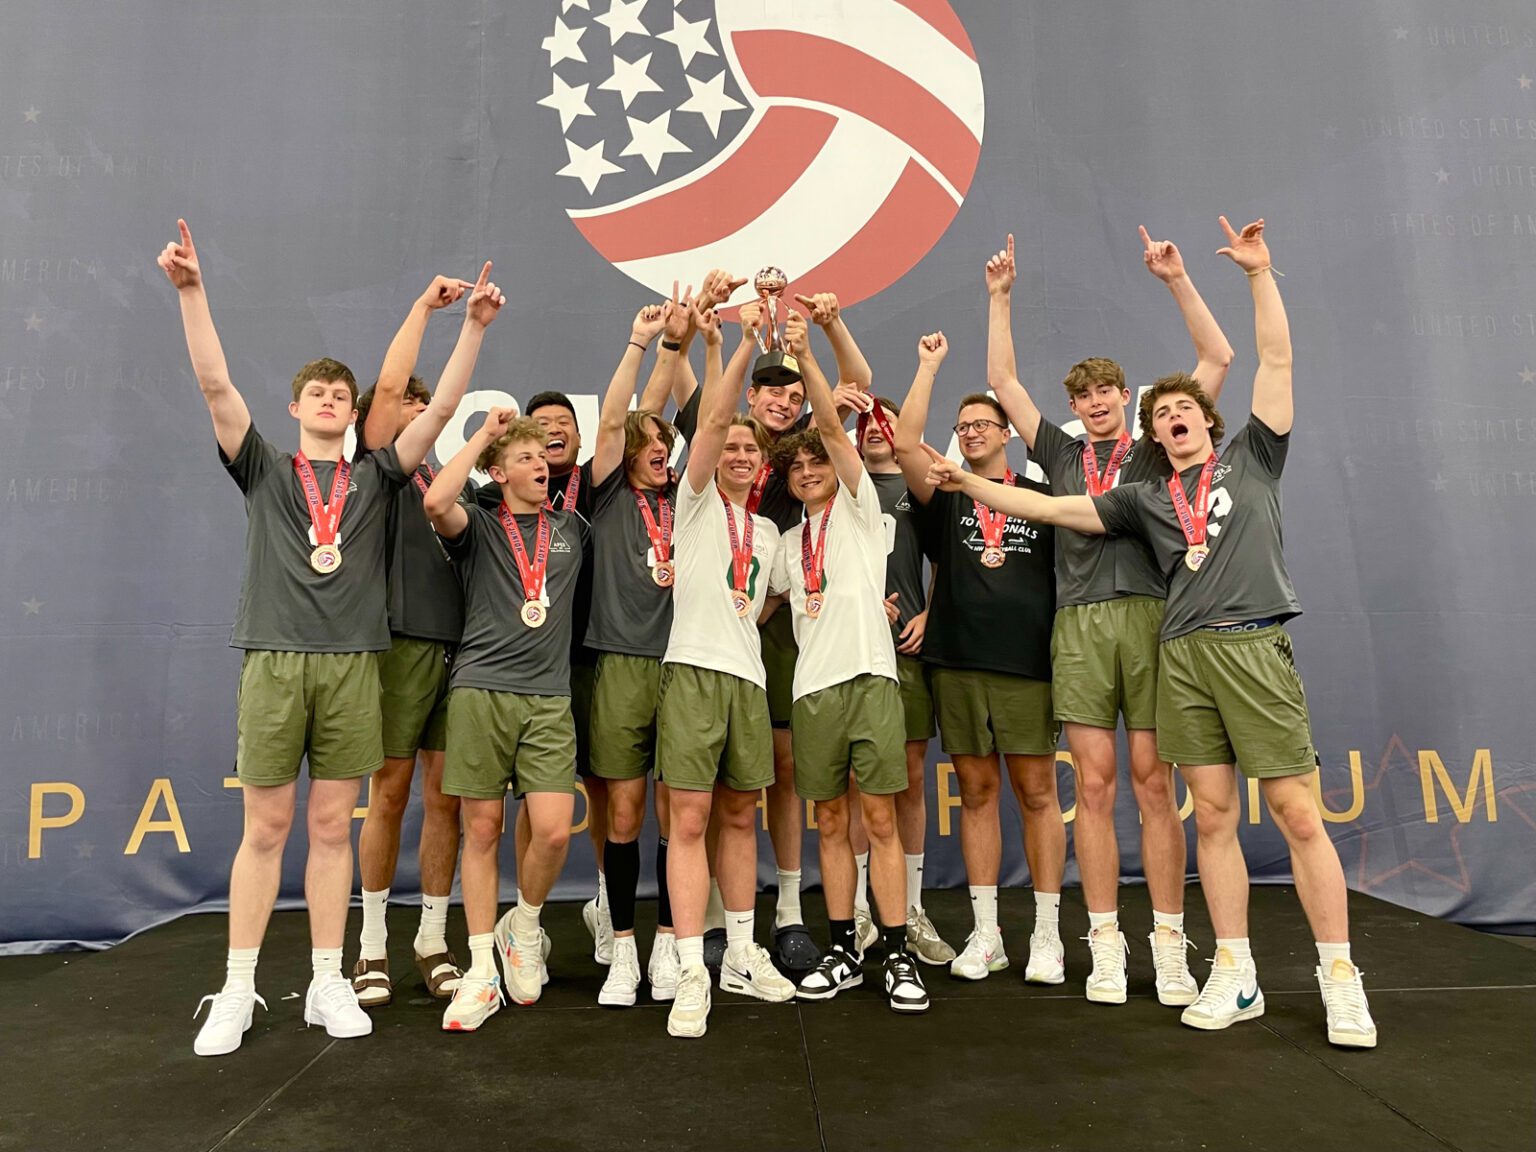 Apex NW Volleyball Club's U16 Ascent team celebrates finishing third out of 45 teams in the club division of the USA Volleyball Boys Junior National Championship in Las Vegas on July 3. The team finished 9-1 and only lost two sets in its first national competition.